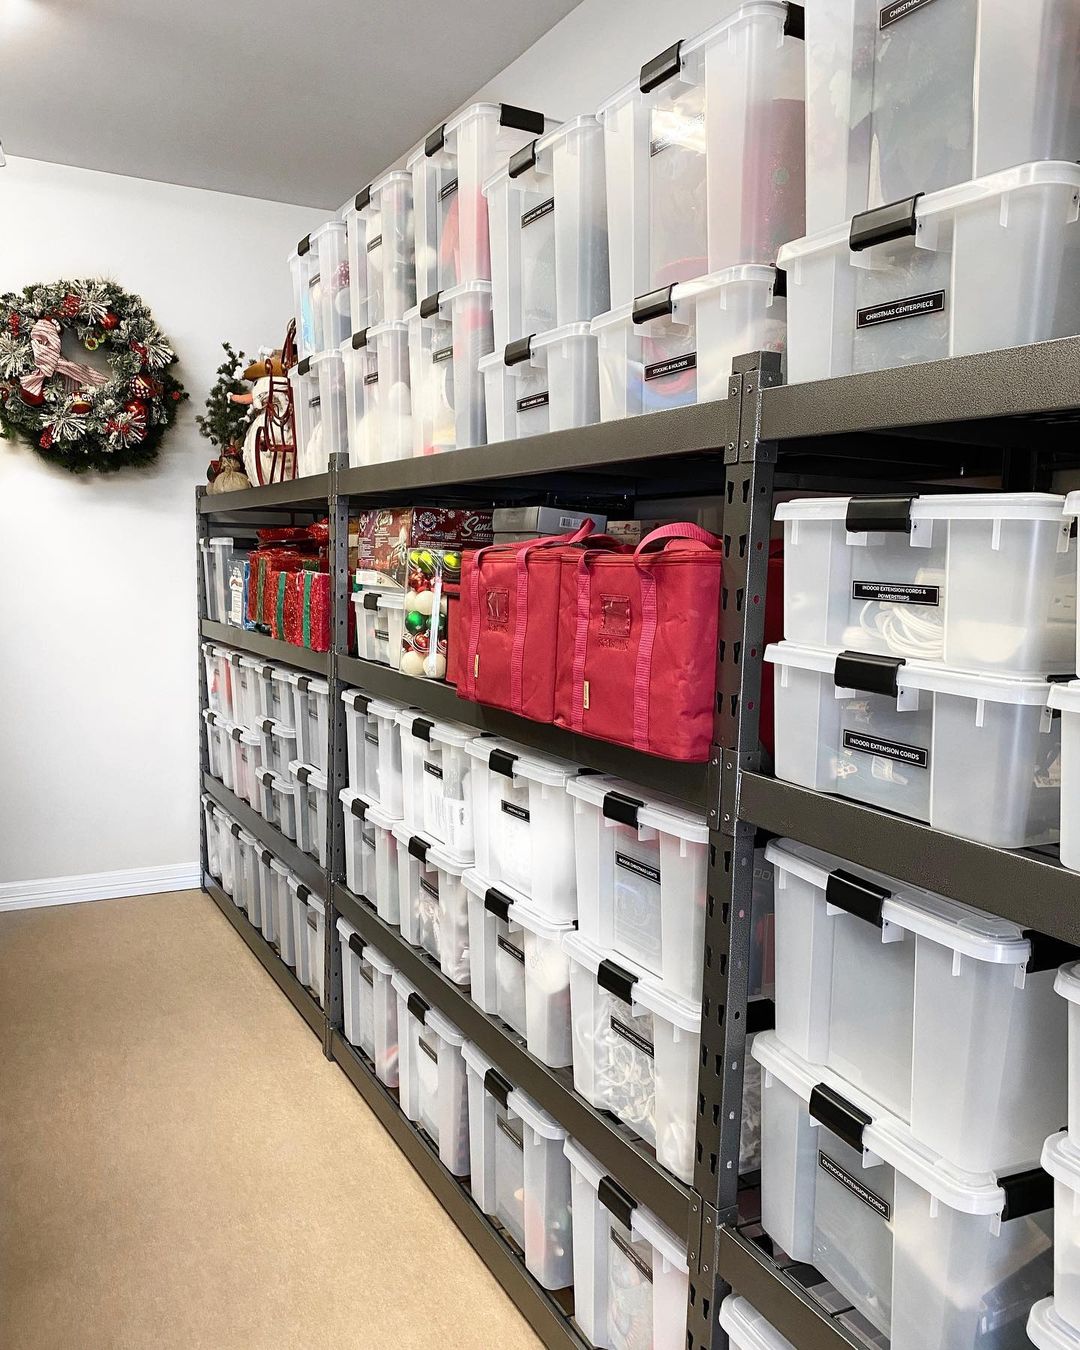 Clean and Organized Storage Room with Clear Totes on Shelves. Photo by Instagram user @theorganizingblonde